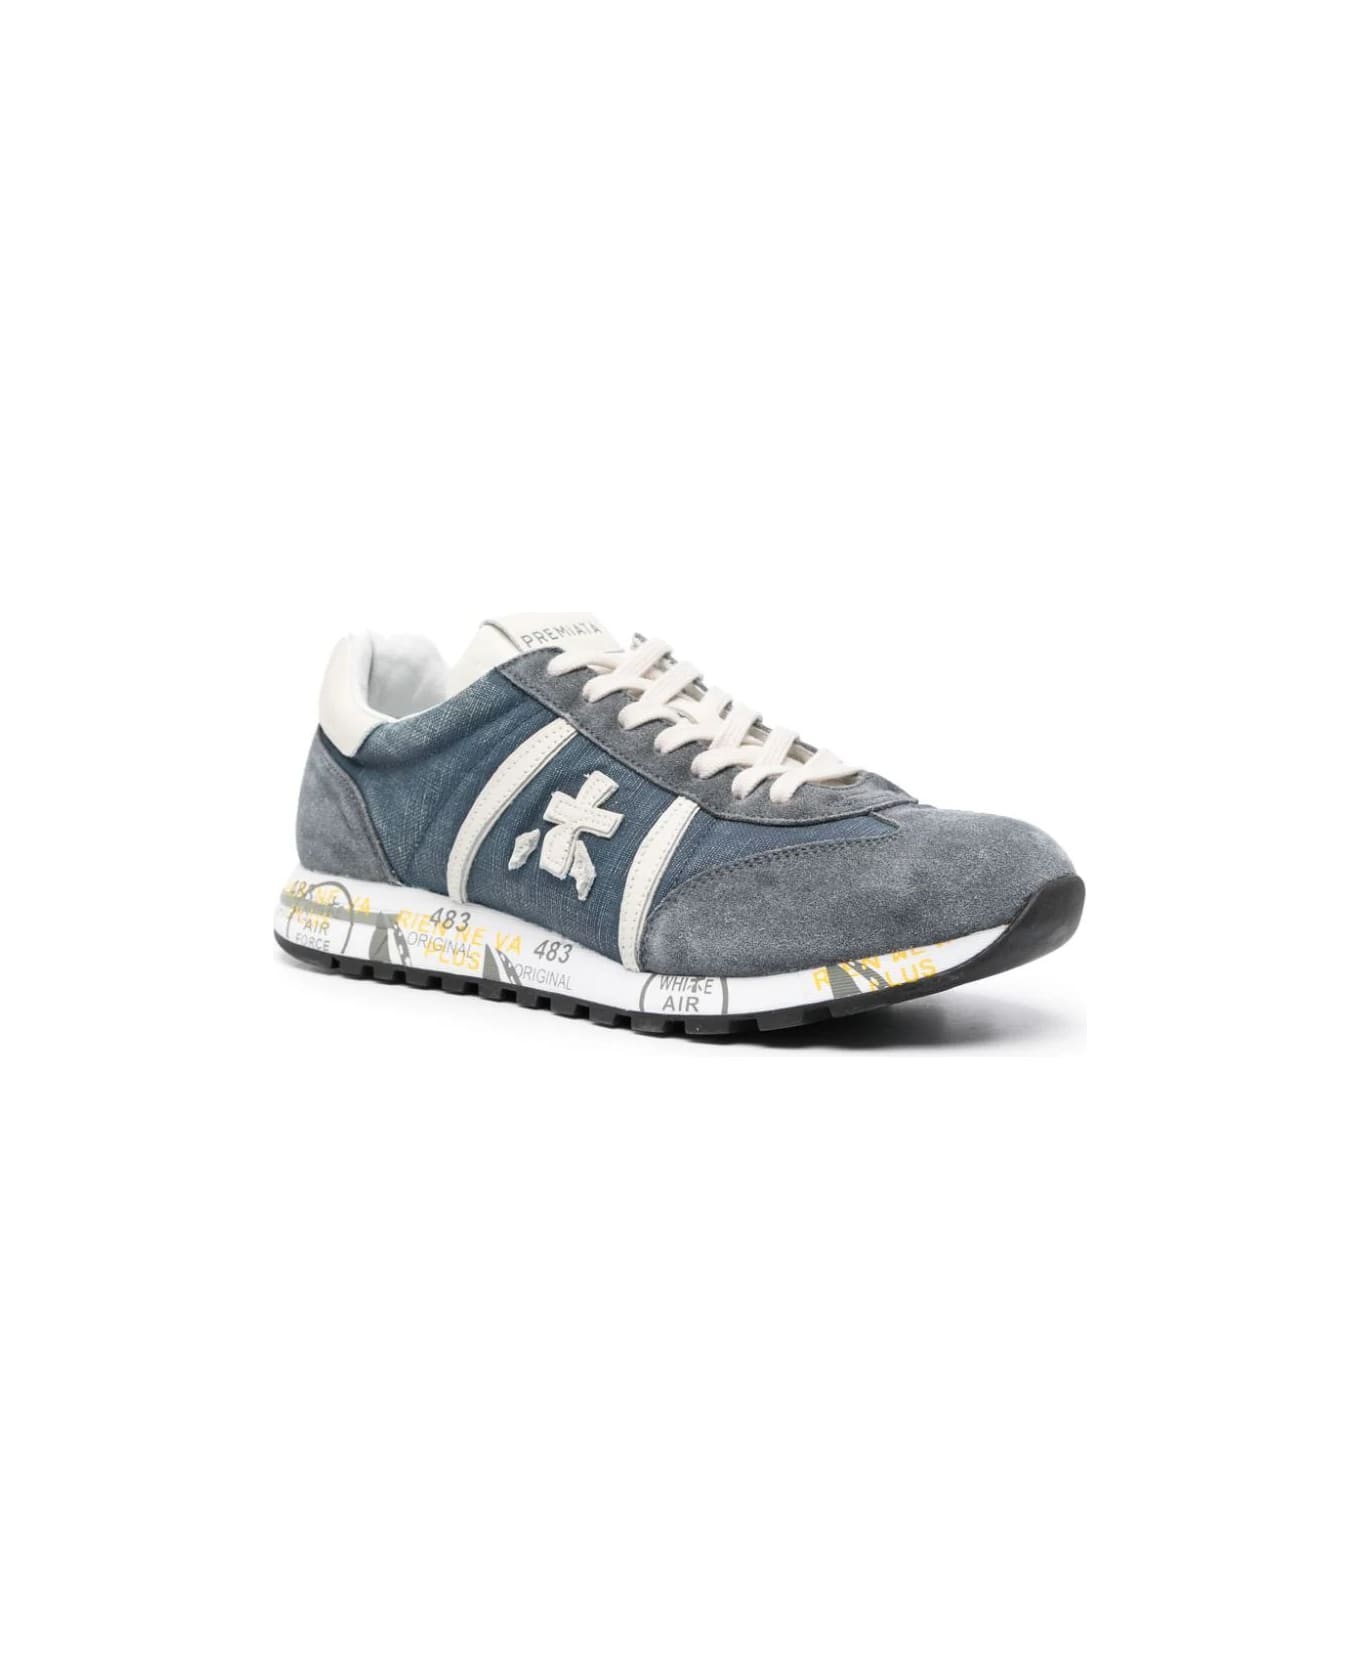 Premiata Lucy 6620 Sneakers - Blue スニーカー